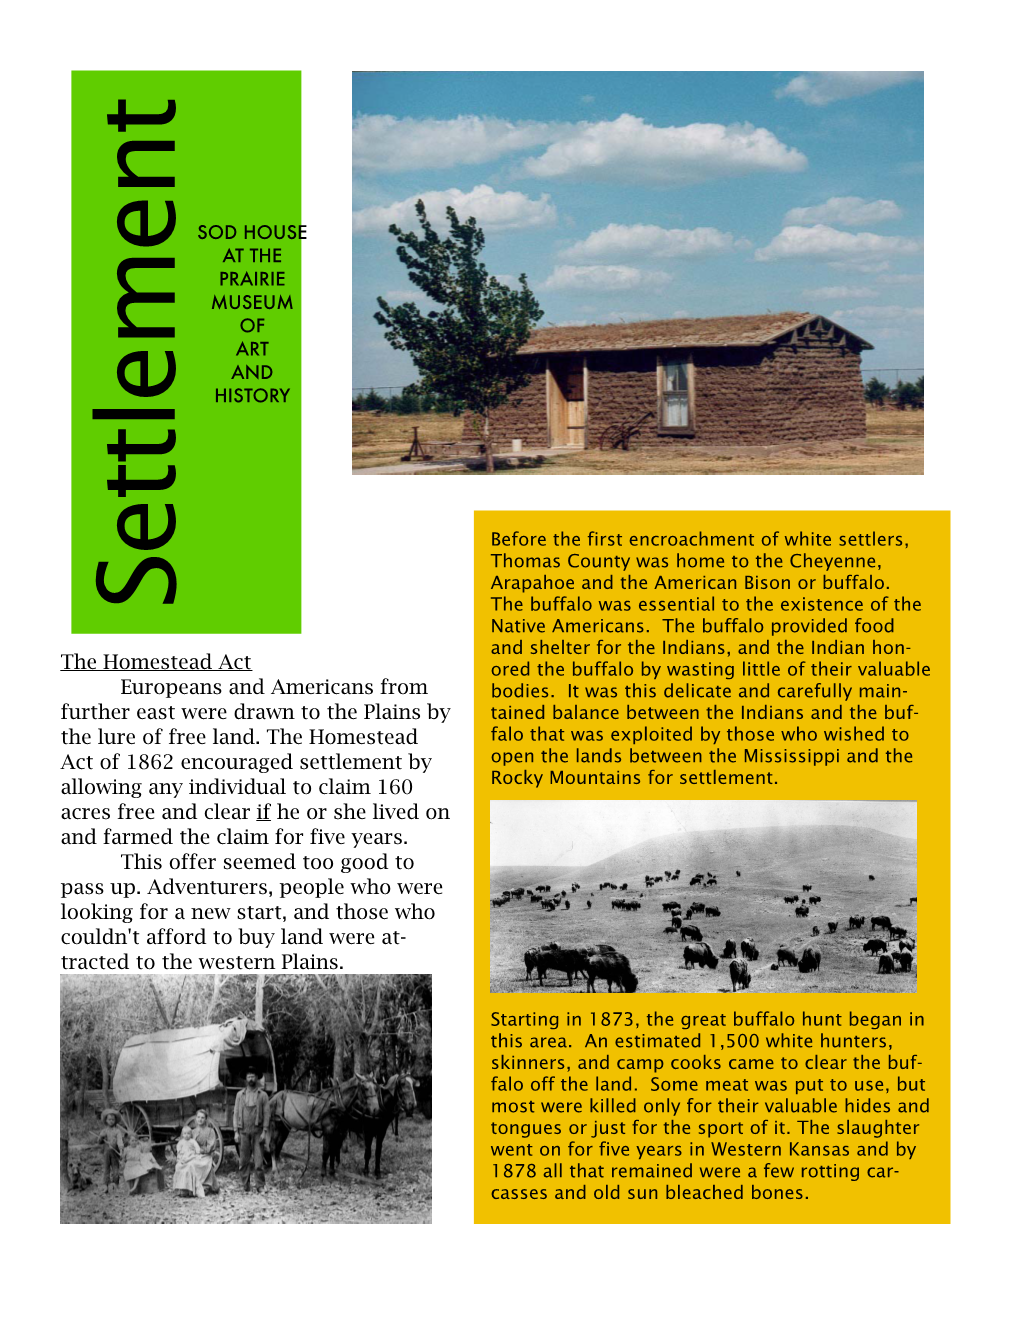 SOD HOUSE E at the PRAIRIE MUSEUM of M ART AND